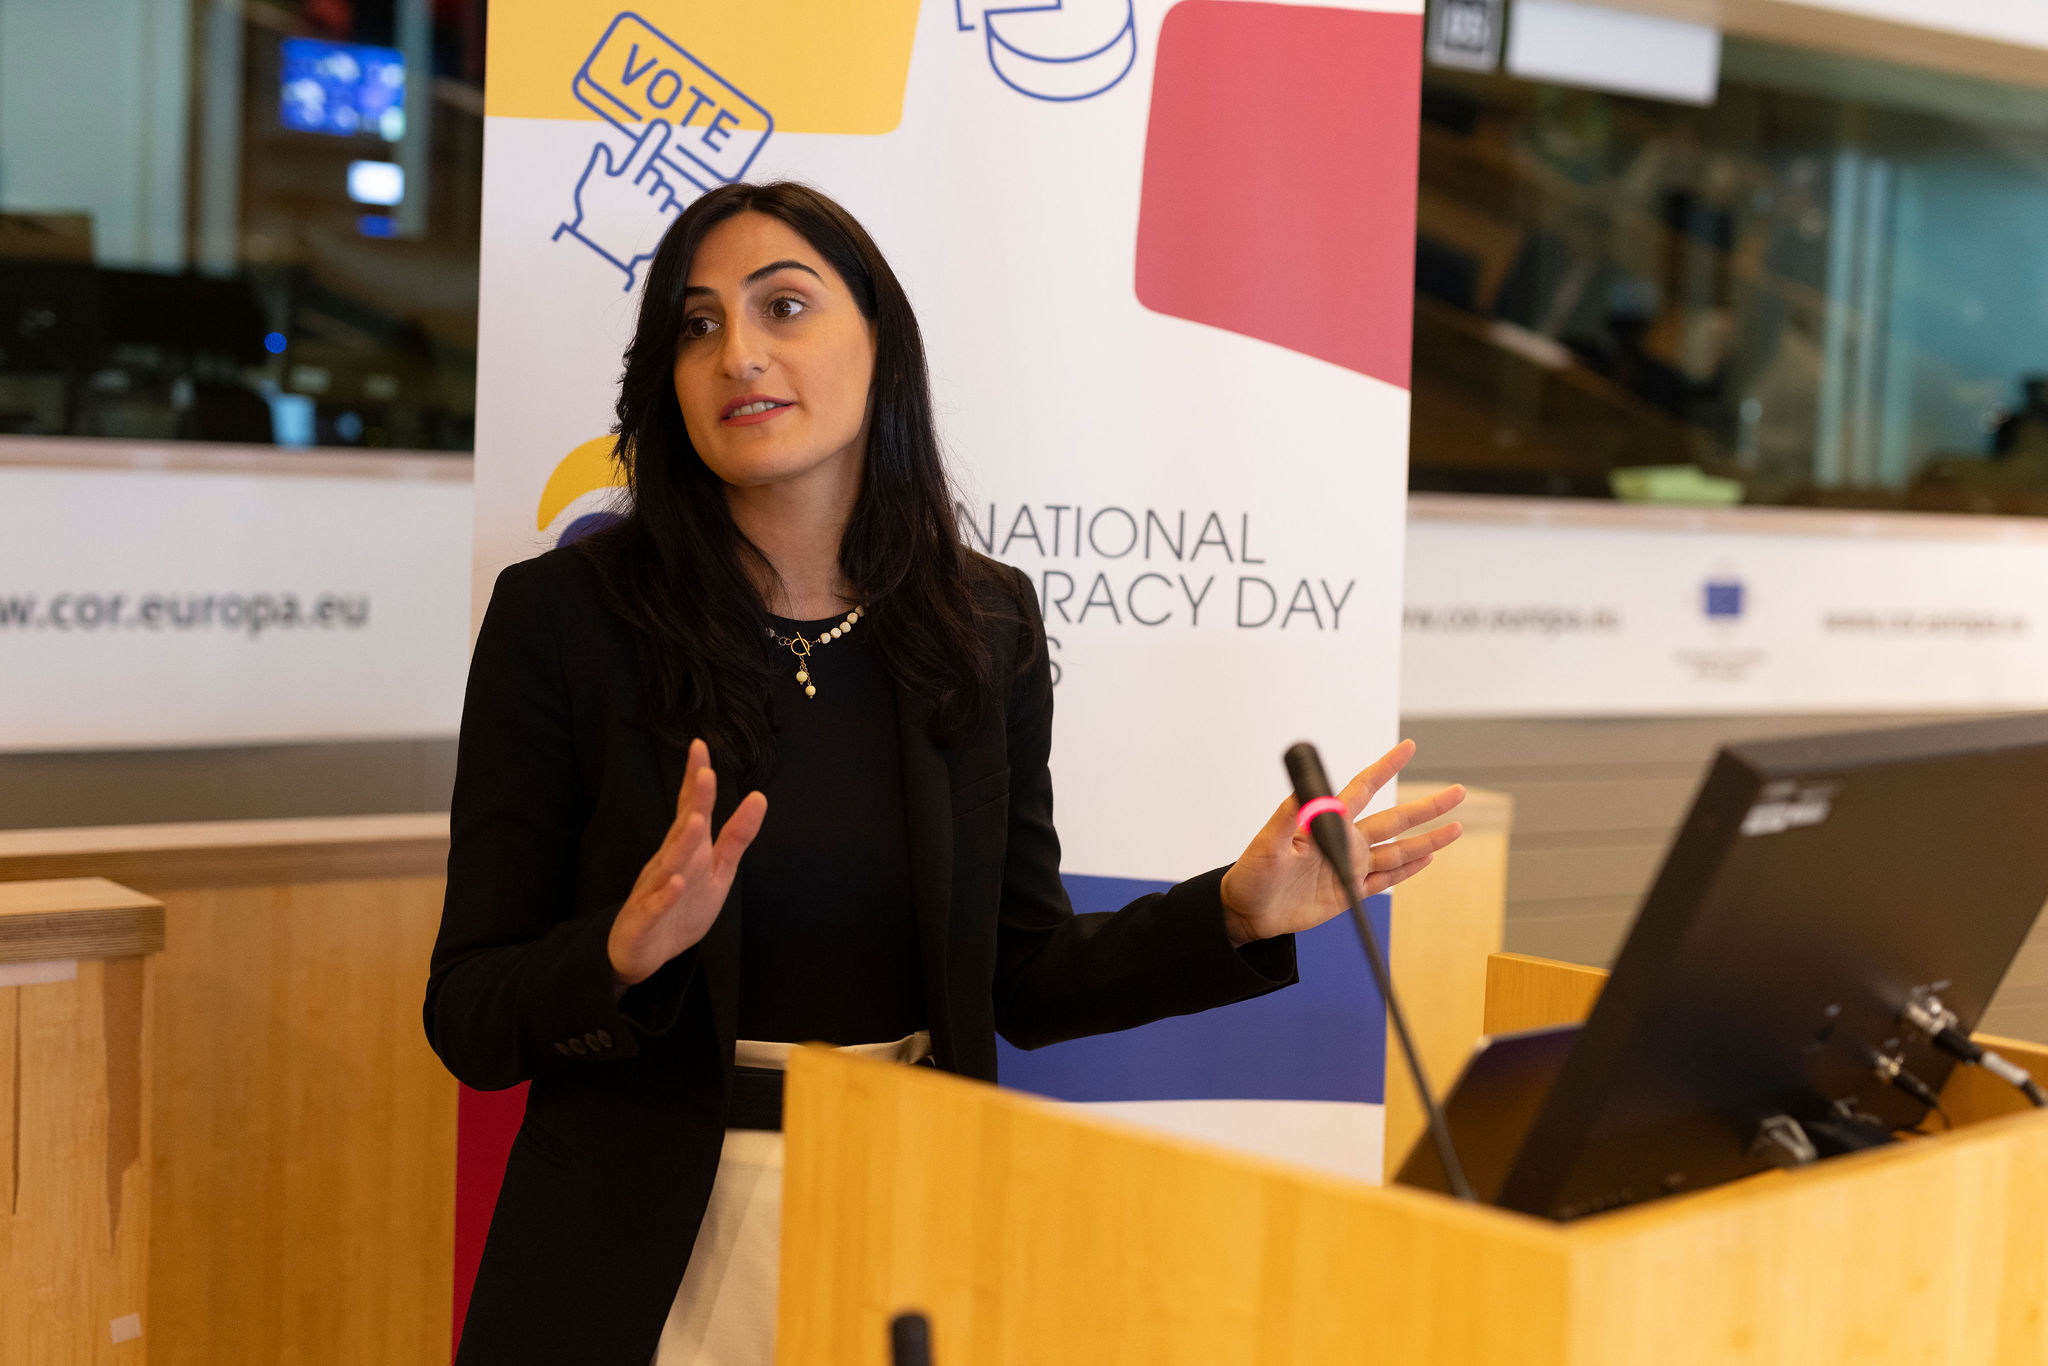 “We all want young people to be more engaged in politics but, for this, we should be open to radical new forms of democracy.” Elene Panchulidze, Research Coordinator at the European Partnership for Democracy.